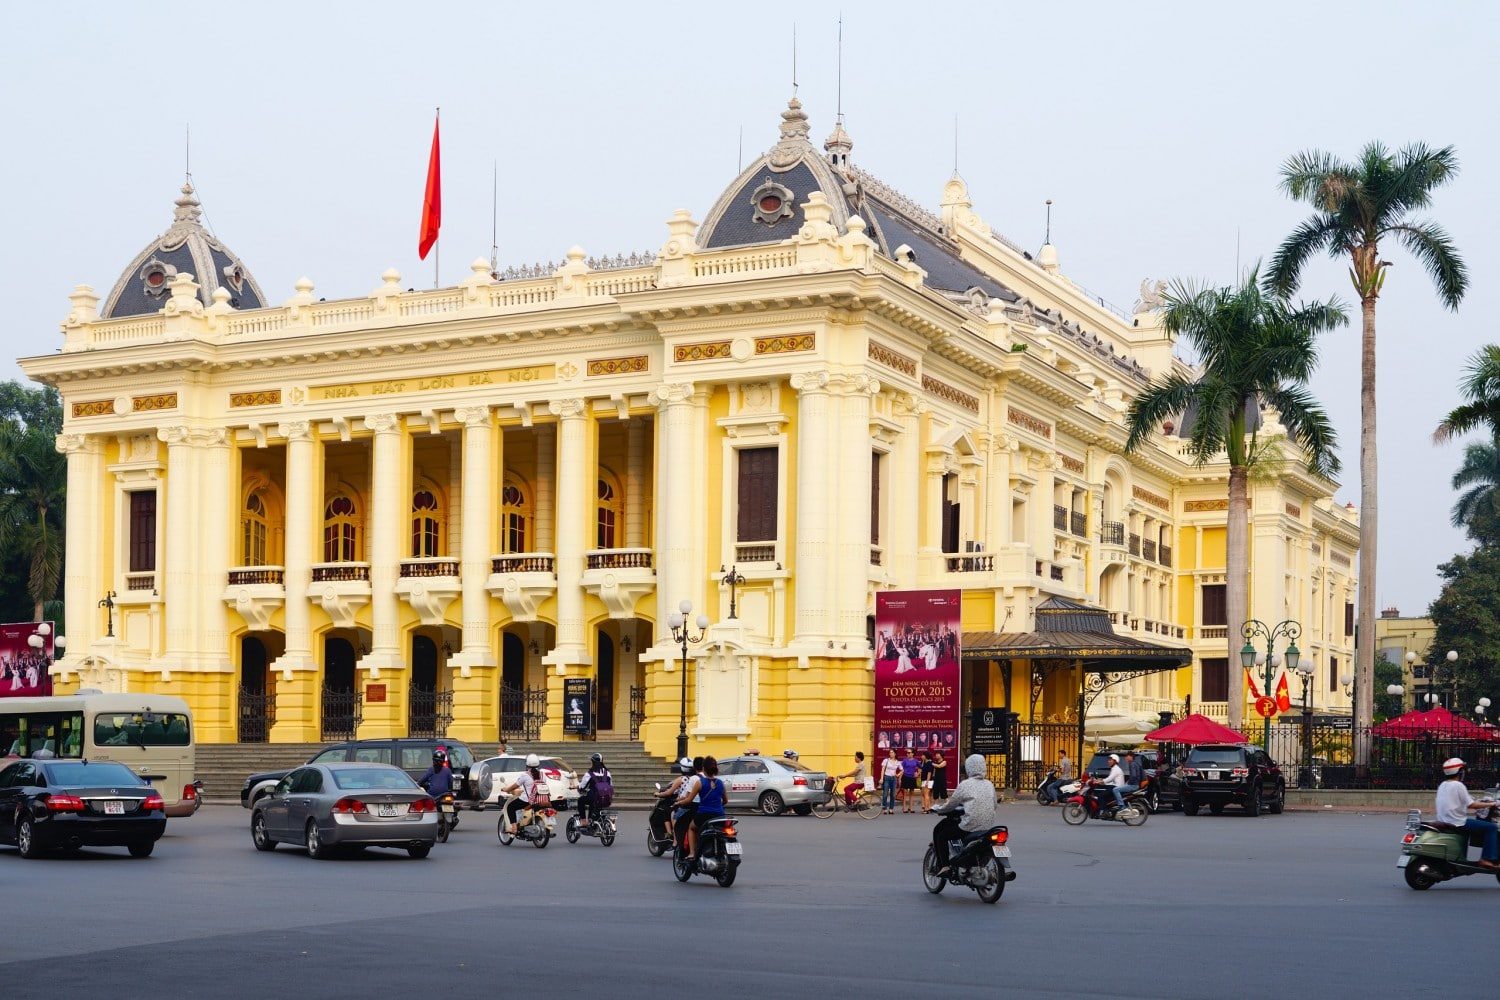 Don't miss a show at the opera house when you are in Hanoi